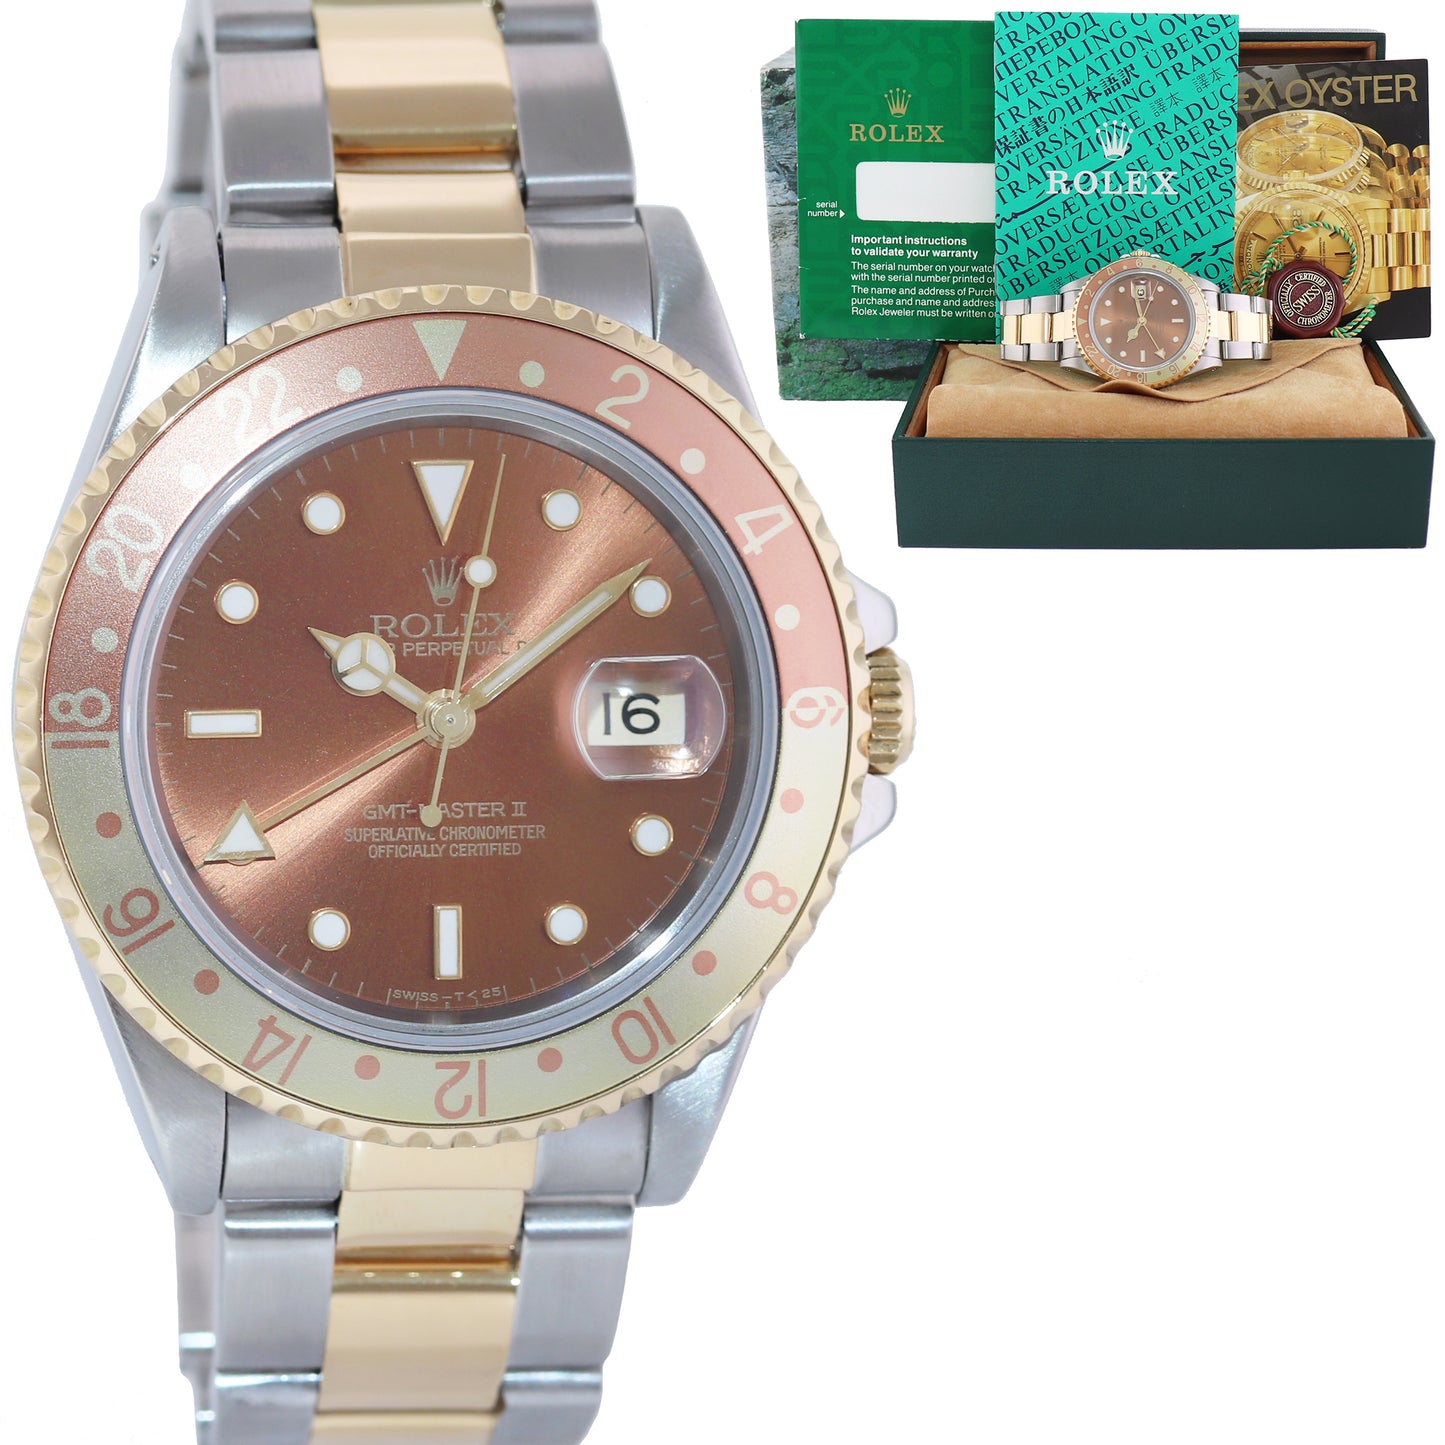 MINT Rolex GMT-Master 16713 Two-Tone Yellow Gold and Steel Rootbeer Watch Box